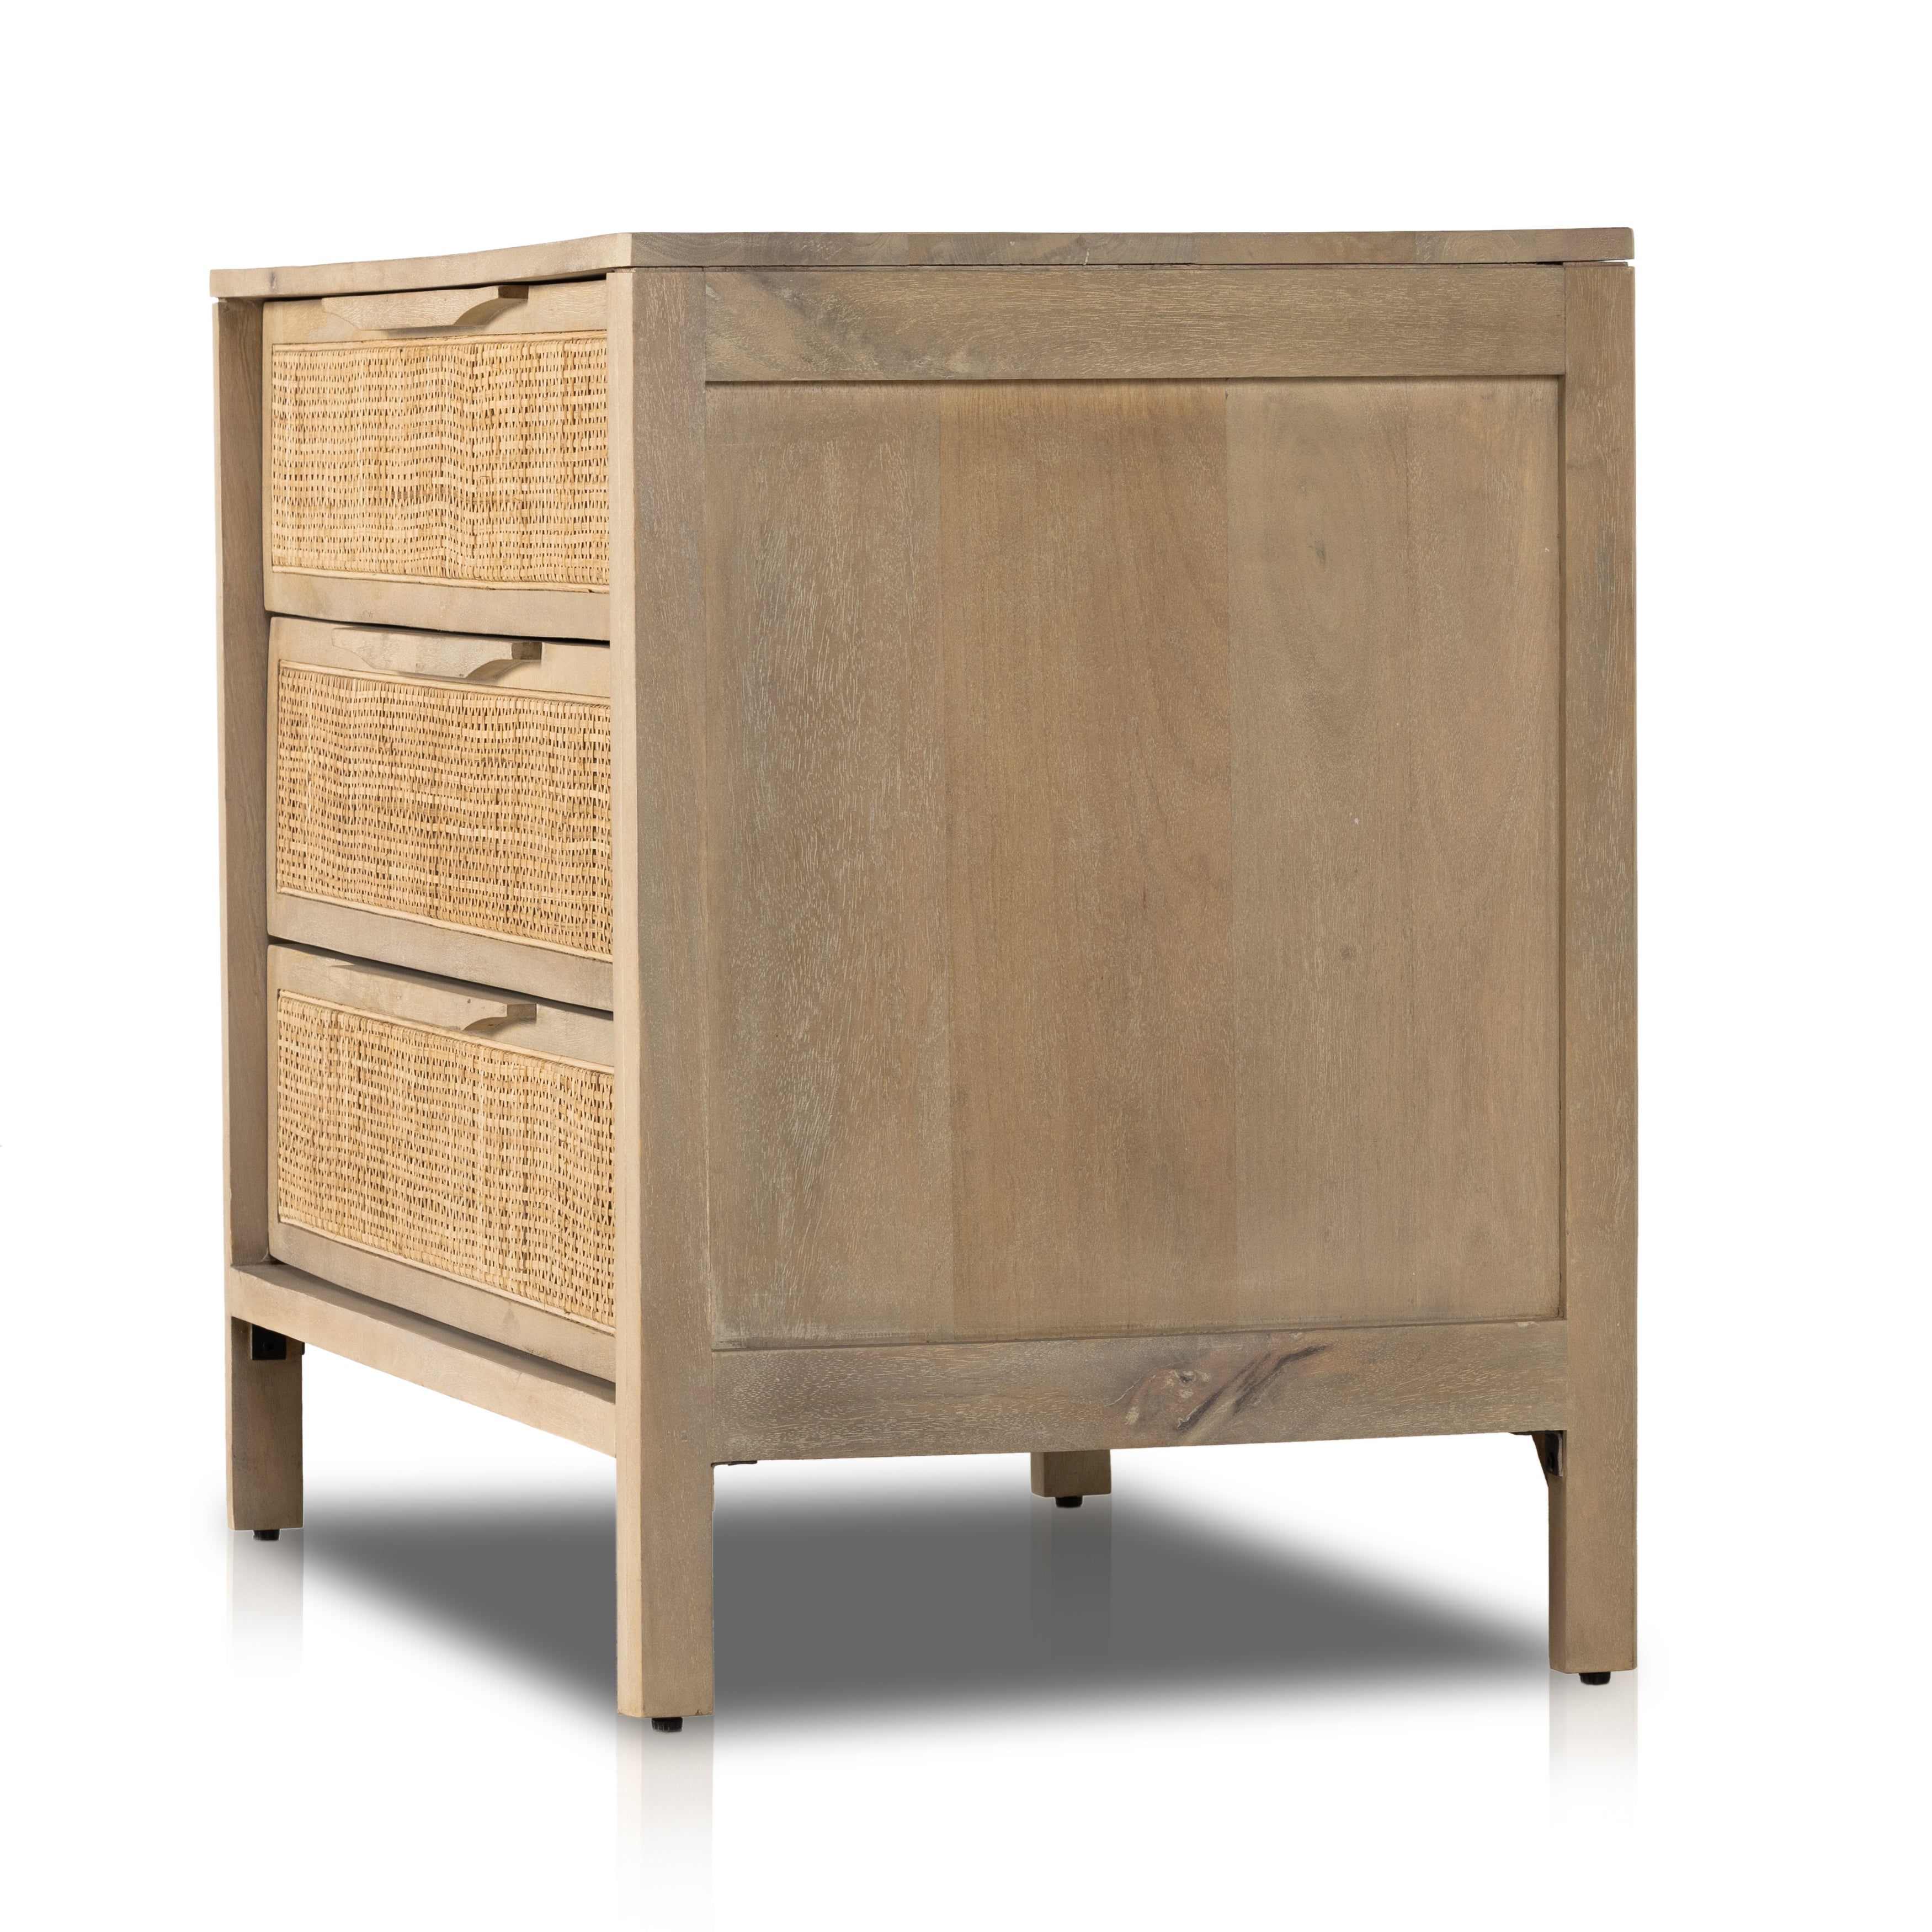 Natural mango frames inset woven cane, for a light, textural look with organic allure. Three spacious drawers provide plenty of closed storage. Amethyst Home provides interior design, new home construction design consulting, vintage area rugs, and lighting in the Park City metro area.